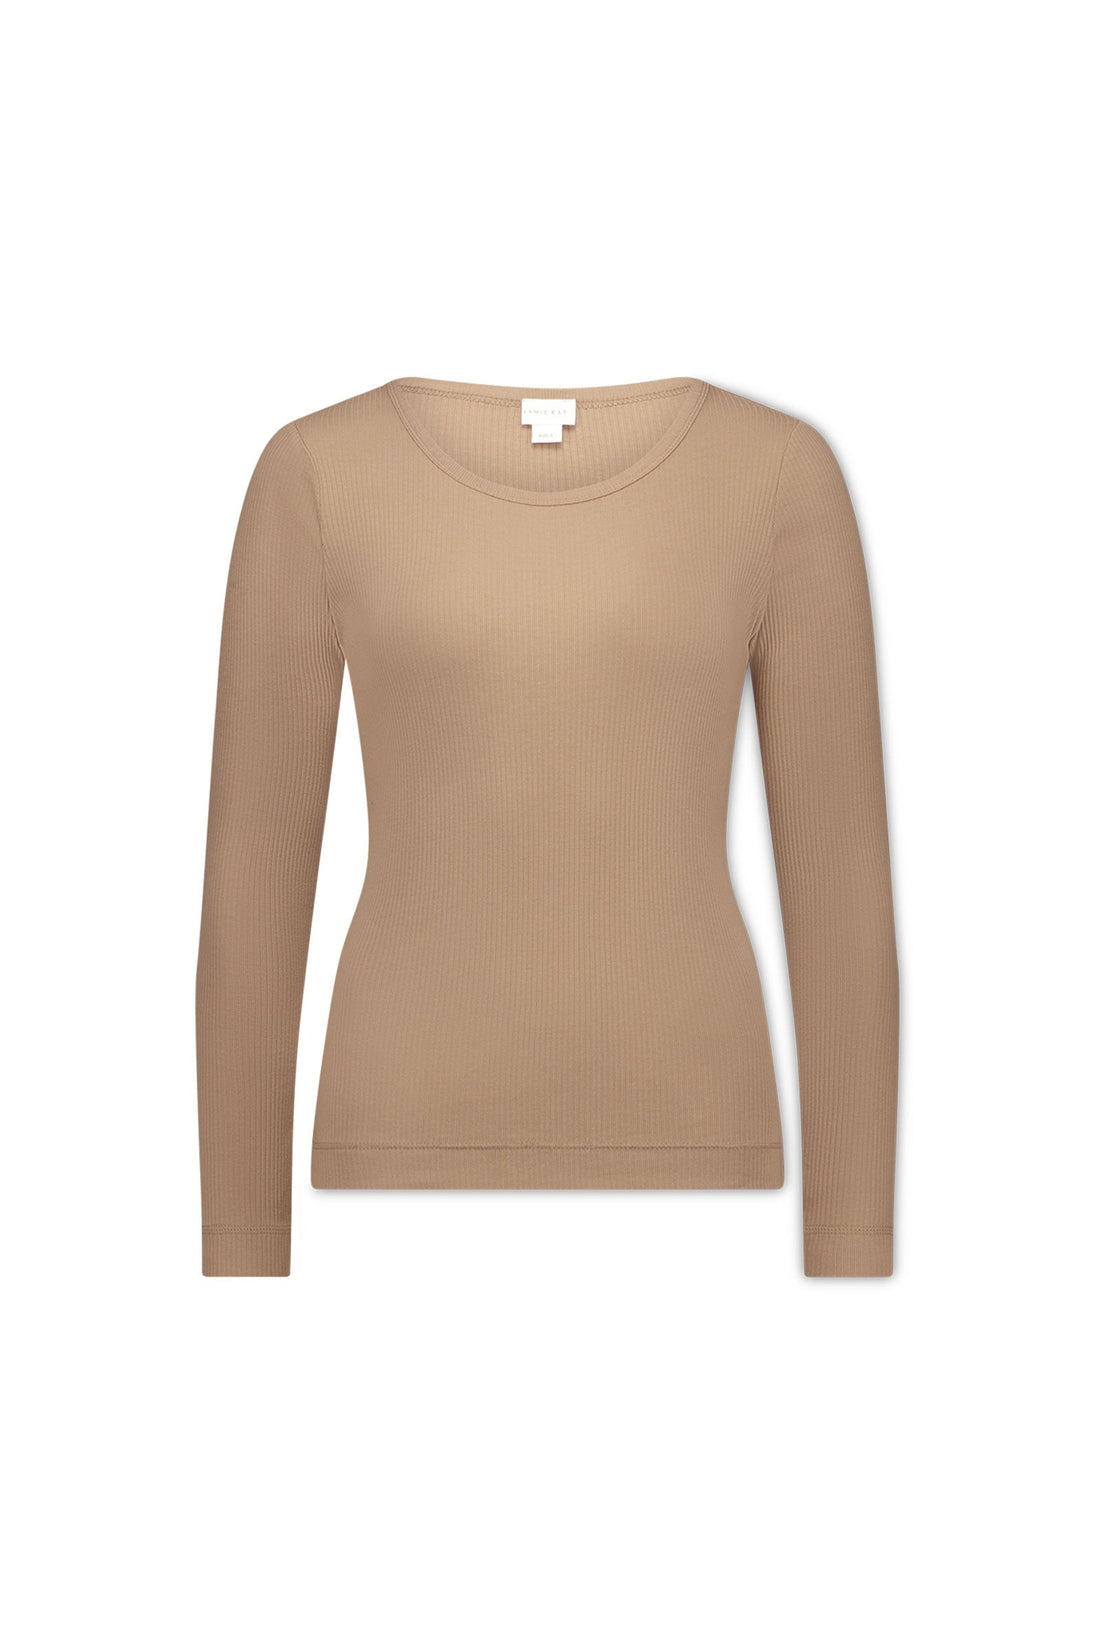 Organic Cotton Modal Womens Long Sleeve Top - Latte Childrens Womens Top from Jamie Kay USA